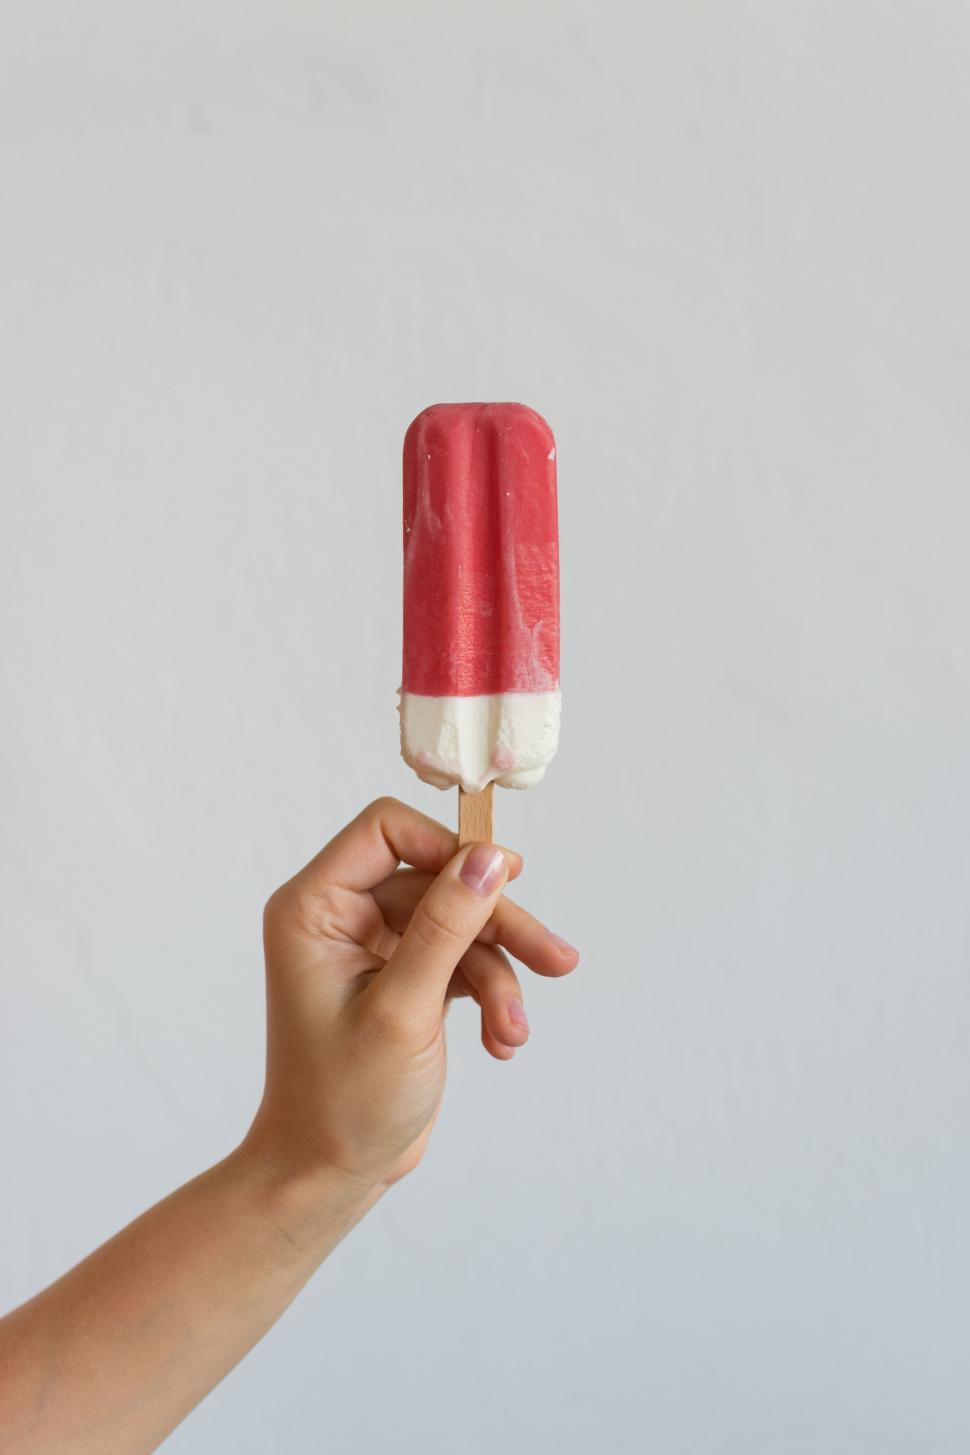 Free Image of Hand holding a red and white popsicle 